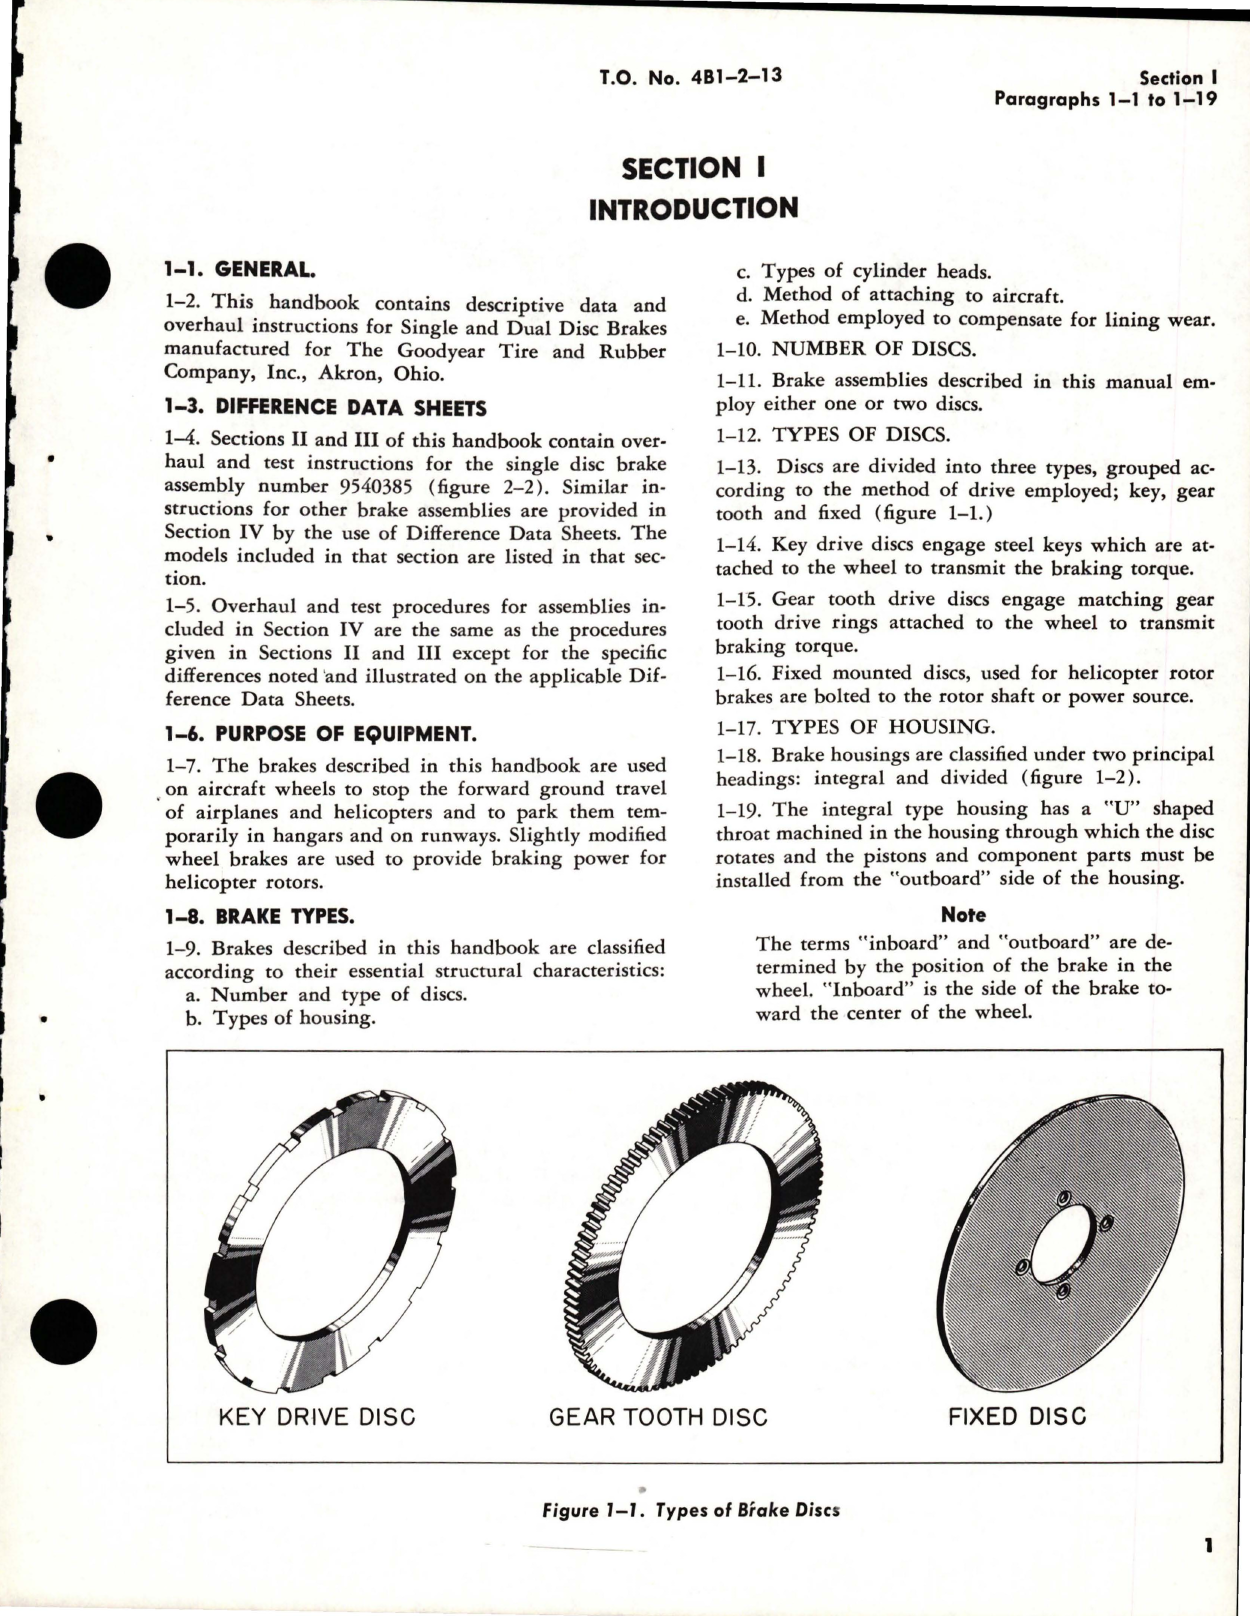 Sample page 5 from AirCorps Library document: Overhaul Instructions for Single and Dual Disc Brakes